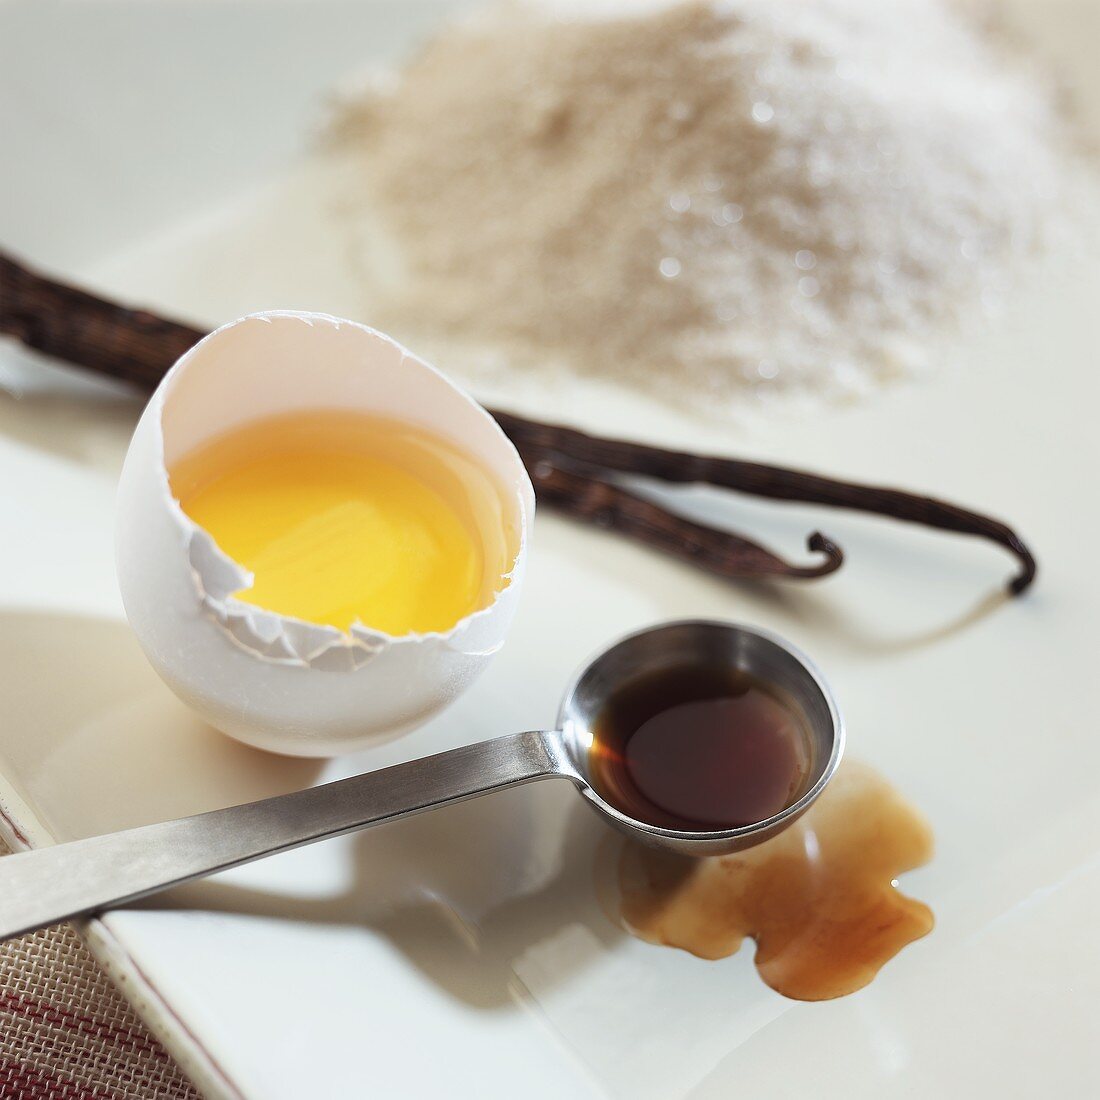 An Egg Yolk in the Shell with Vanilla and Sugar